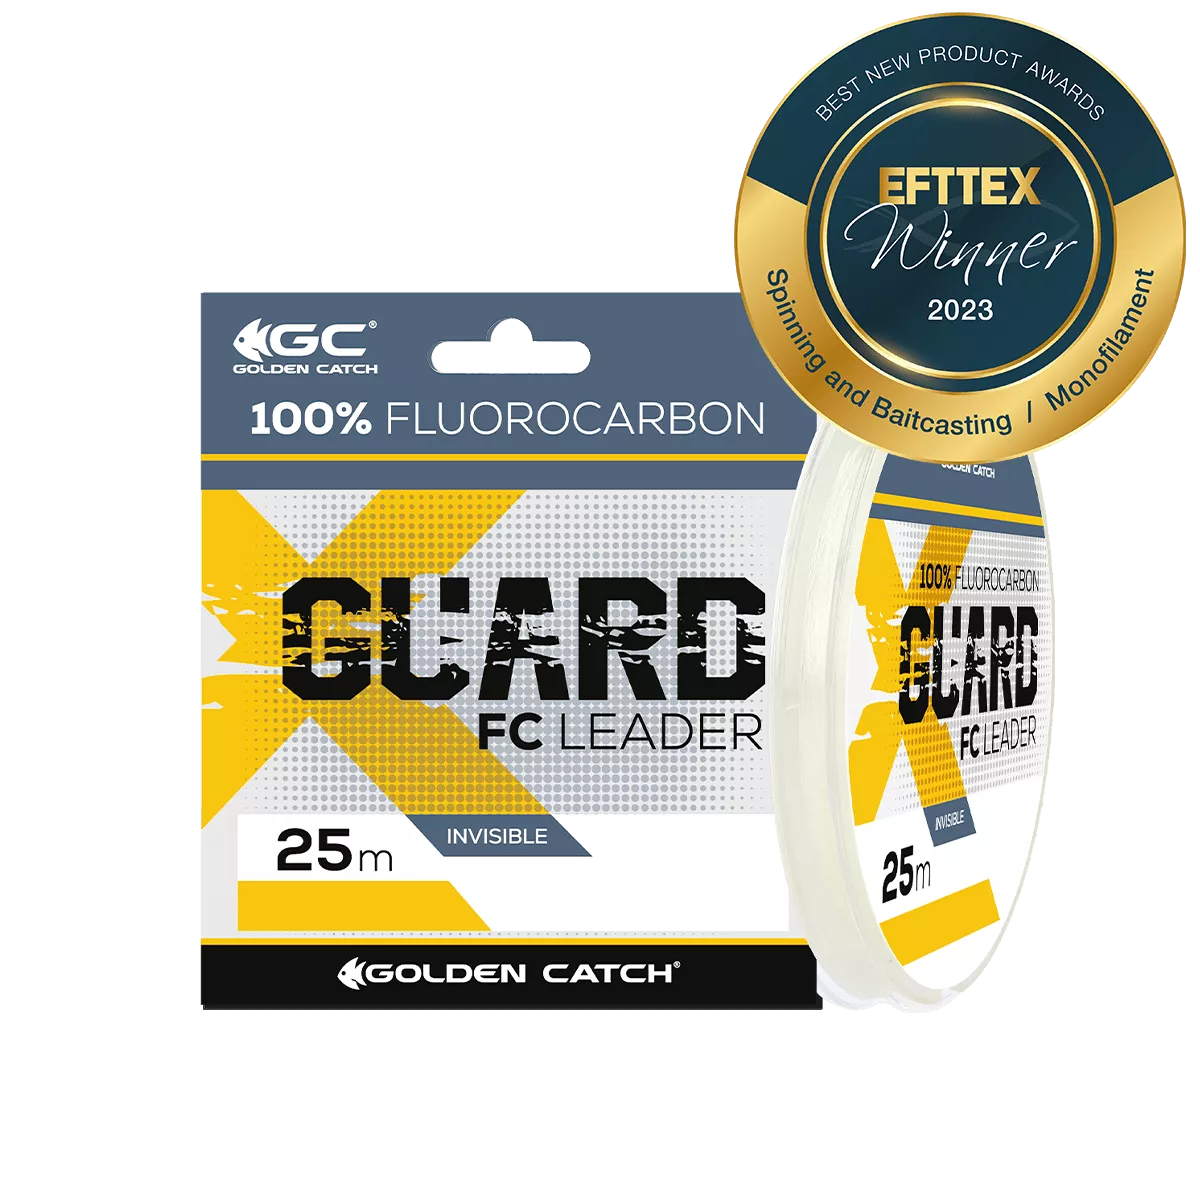 Golden Catch X-Guard Fluorocarbon Leader 25m: check it out on the